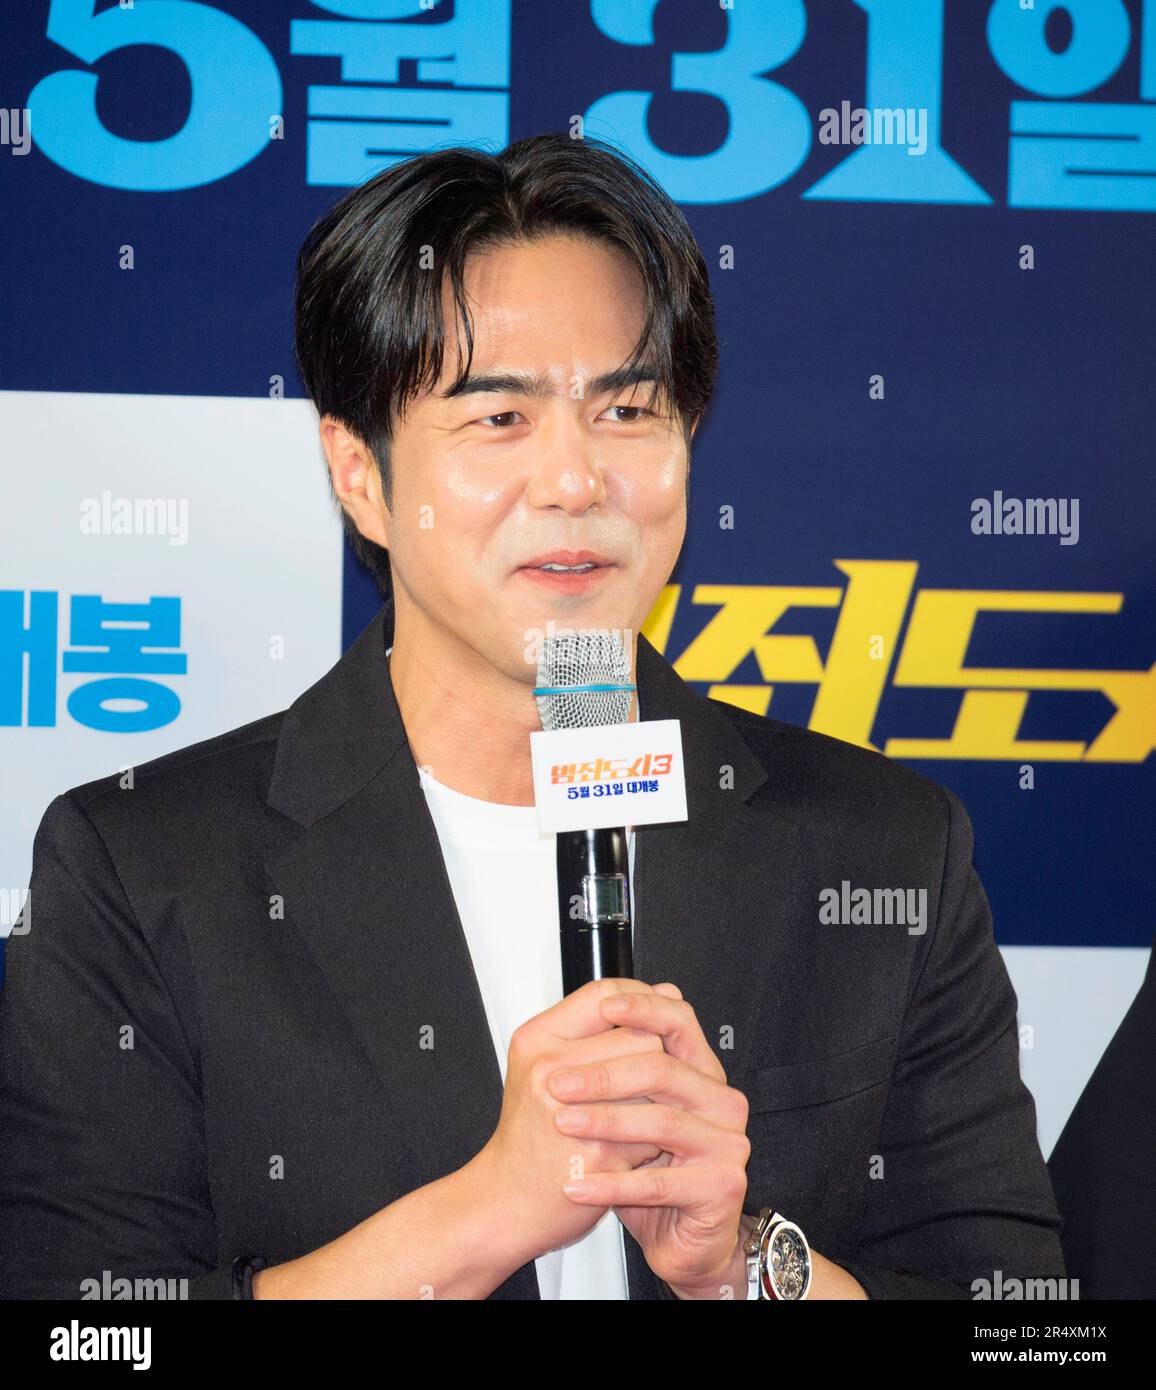 Jun Suk-Ho, May 22, 2023 : South Korean actor Jun Suk-Ho attends a photocall before a VIP preview of South Korean movie 'The Roundup: No Way Out' in Seoul, South Korea. 'The Roundup: No Way Out', the third installment of 'The Outlaws' series will hit local theaters on May 31. (Photo by Lee Jae-Won/AFLO) (SOUTH KOREA) Stock Photo